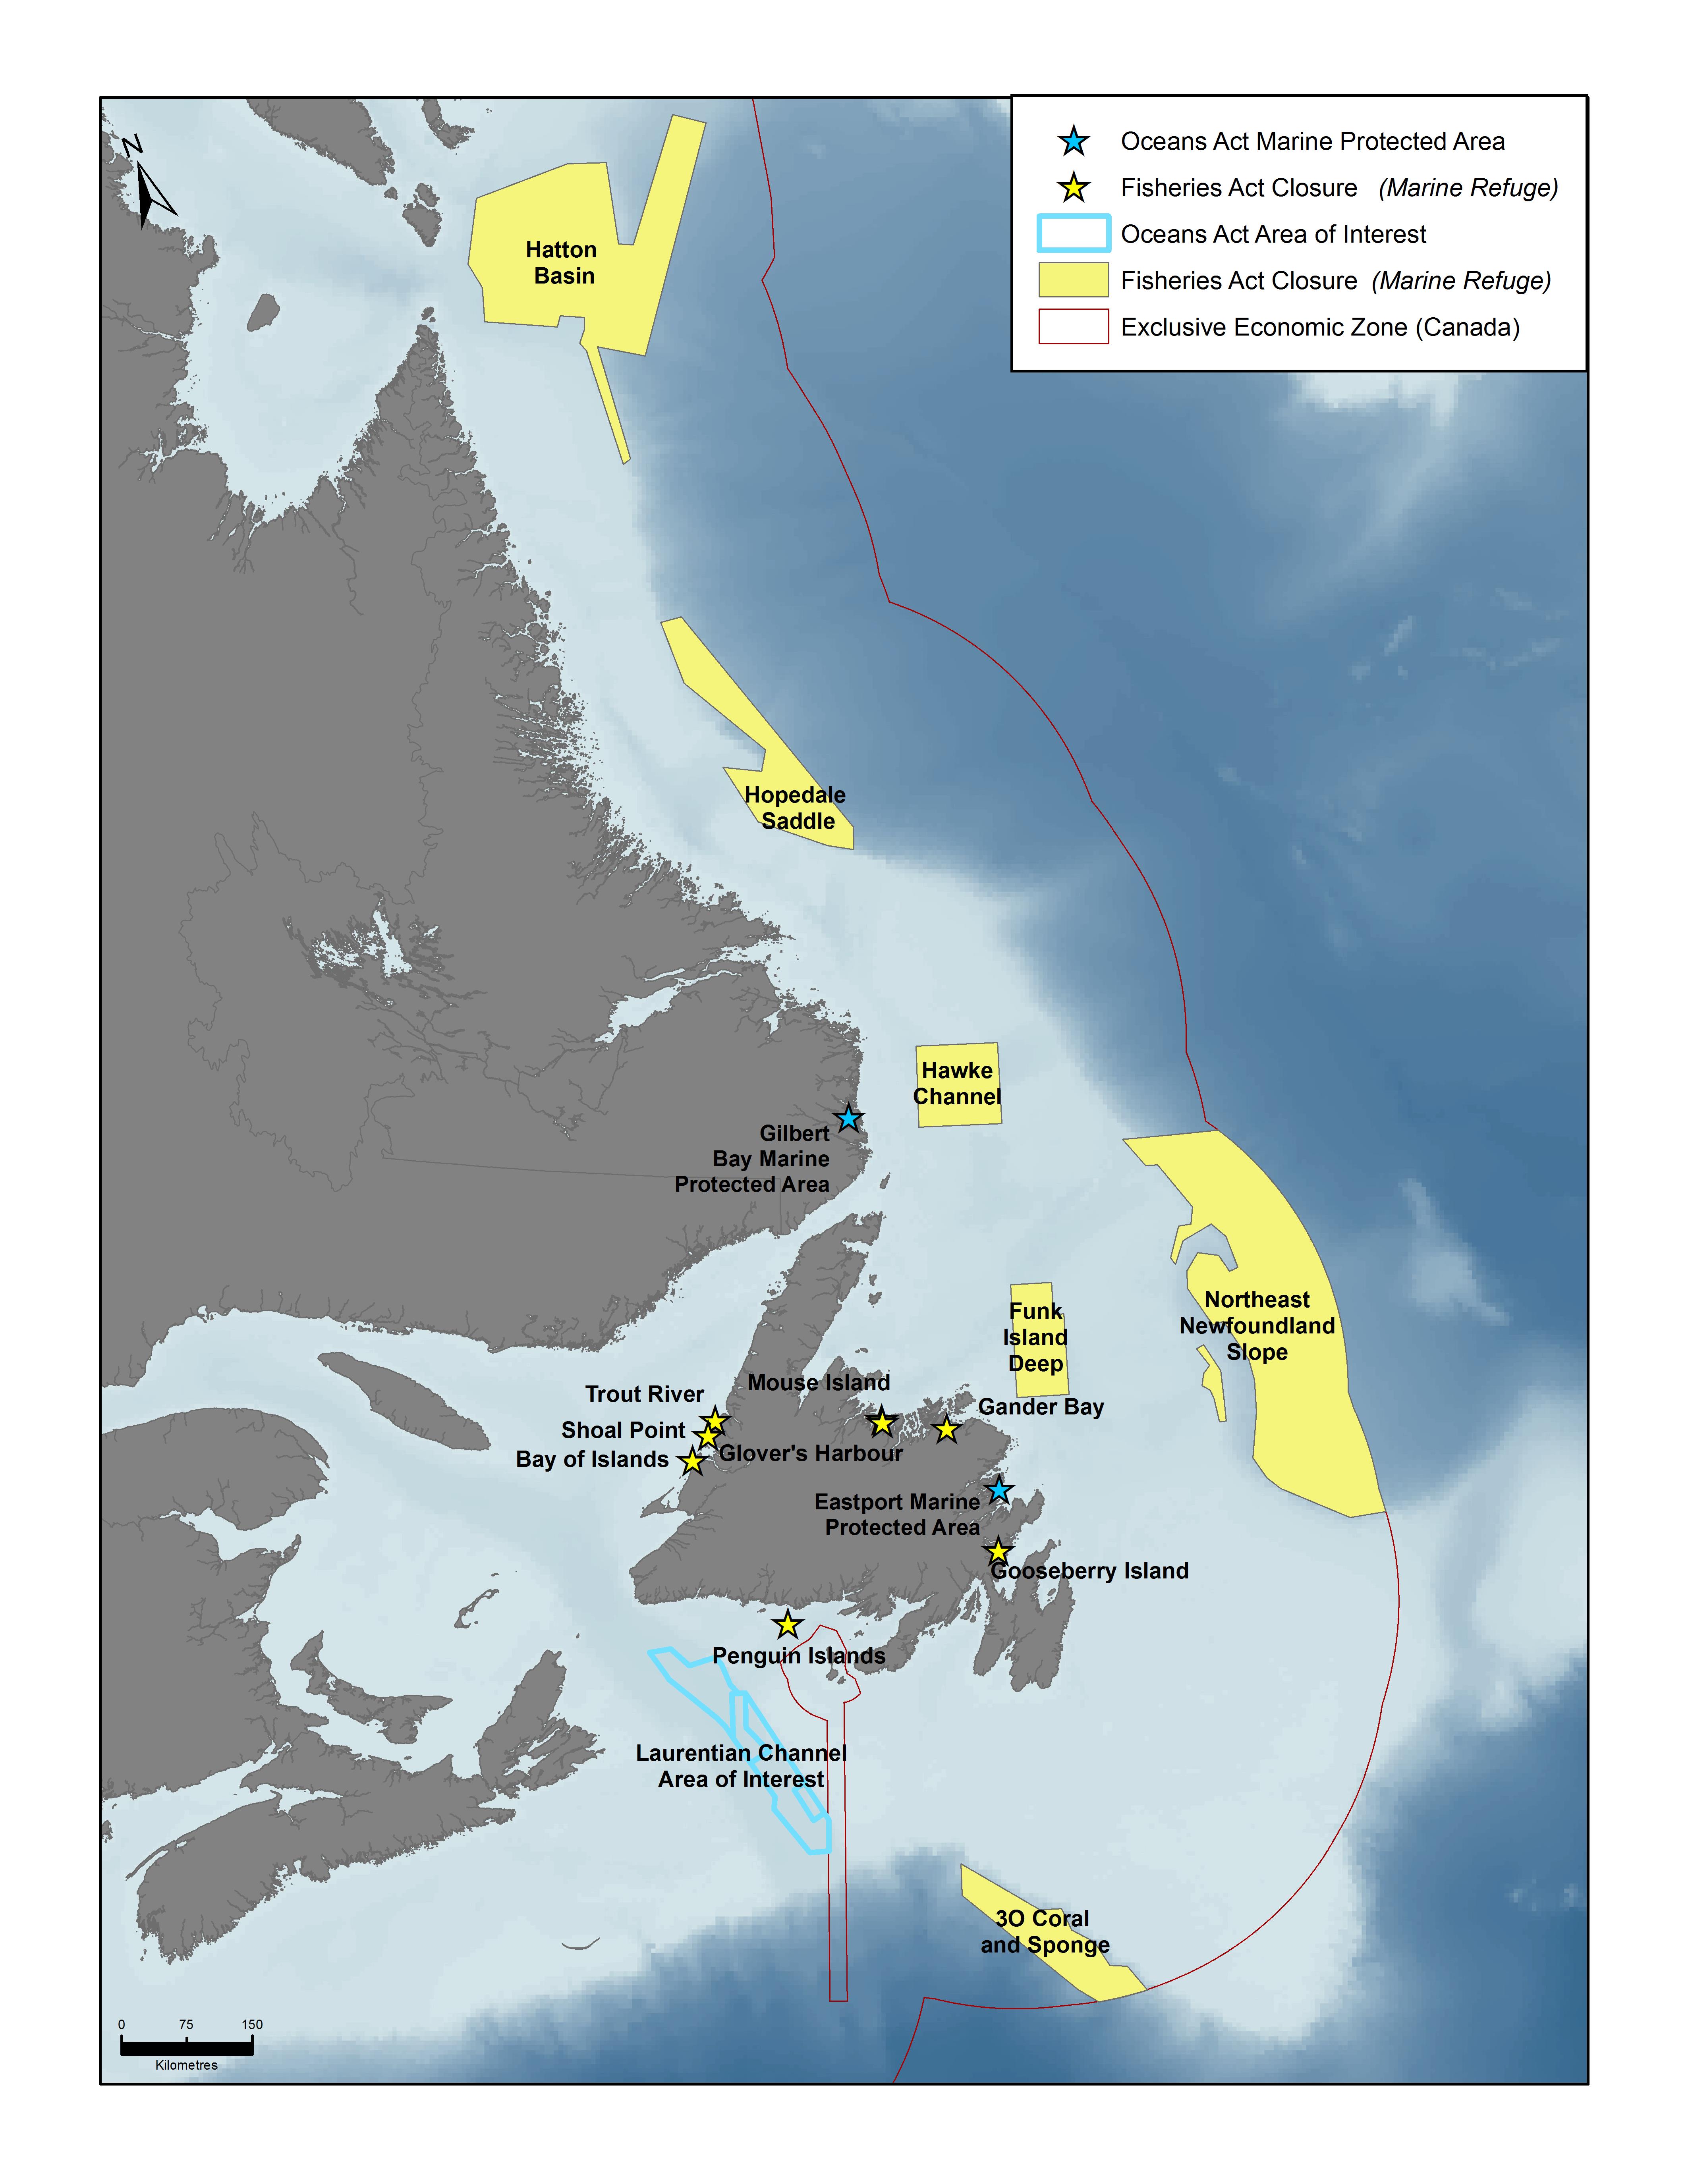 Map of Refuges, Marine Protected Areas, and Area of Interest in the Newfoundland and Labrador Region